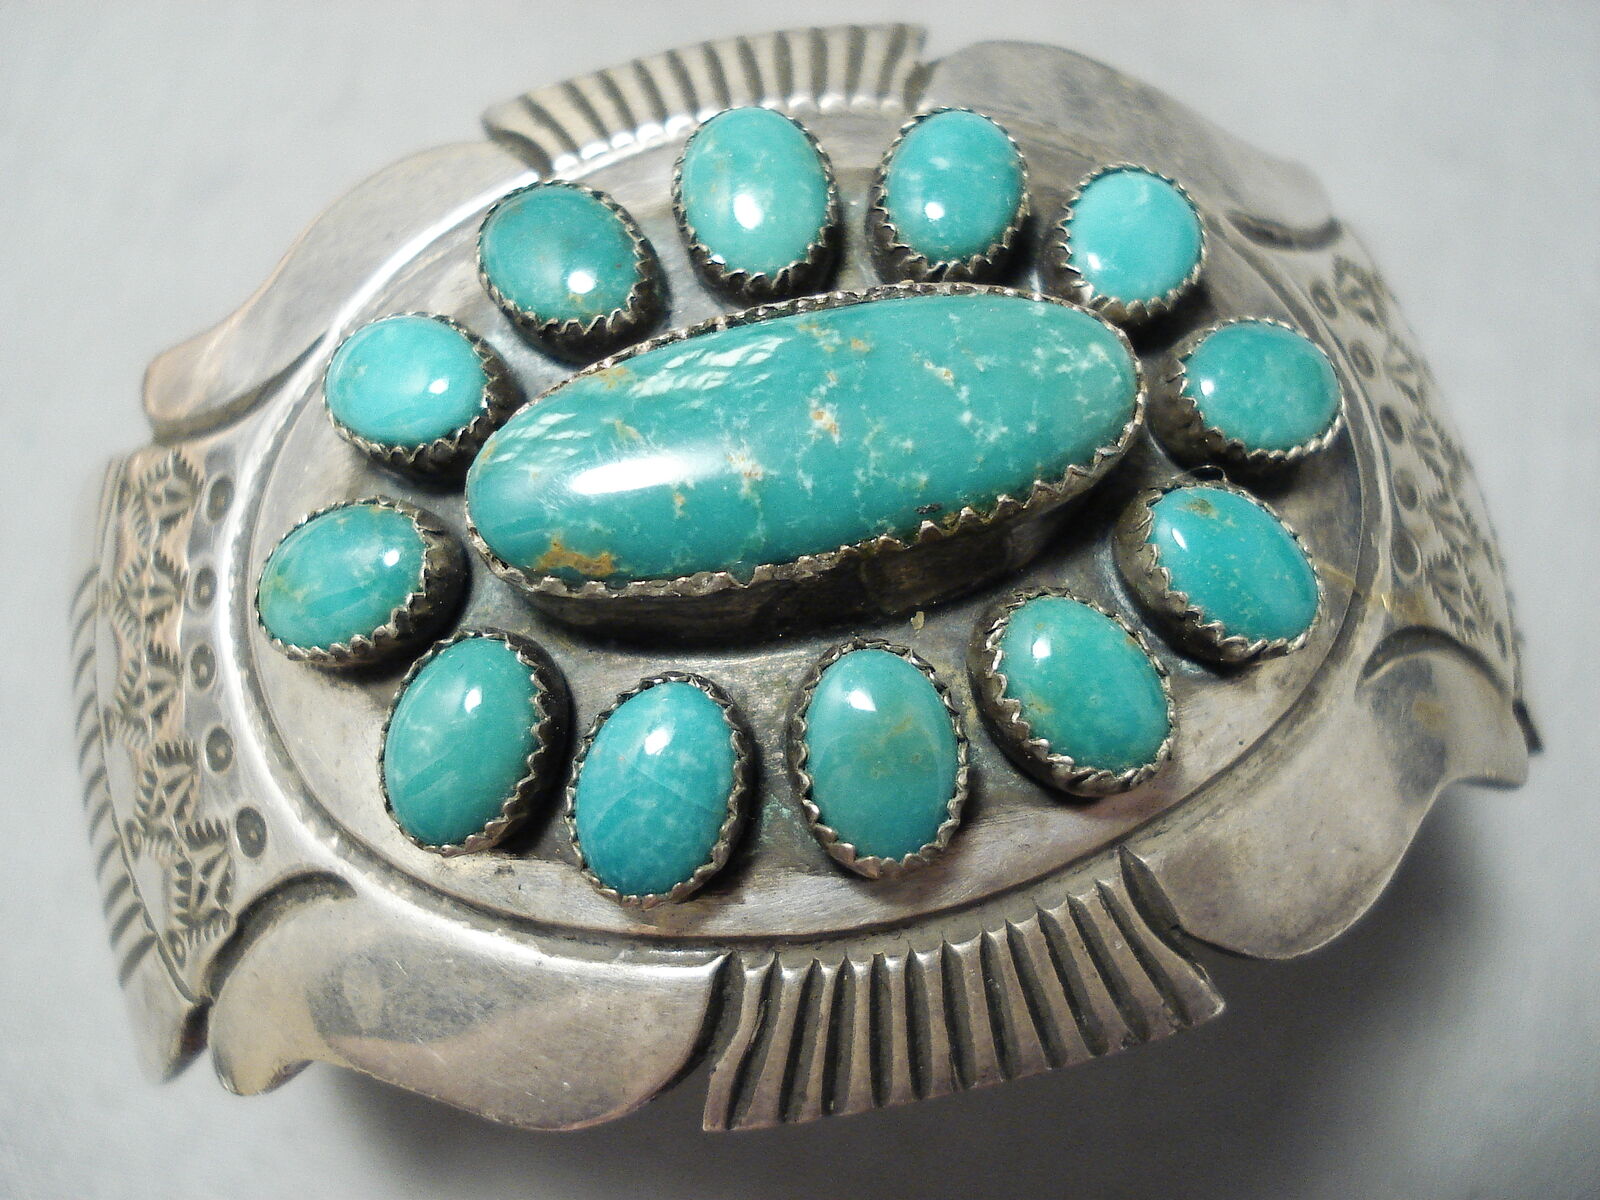 JIMMY SHAY VINTAGE NAVAJO GREEN TURQUOISE HEAVY STERLING SILVER BRACELET